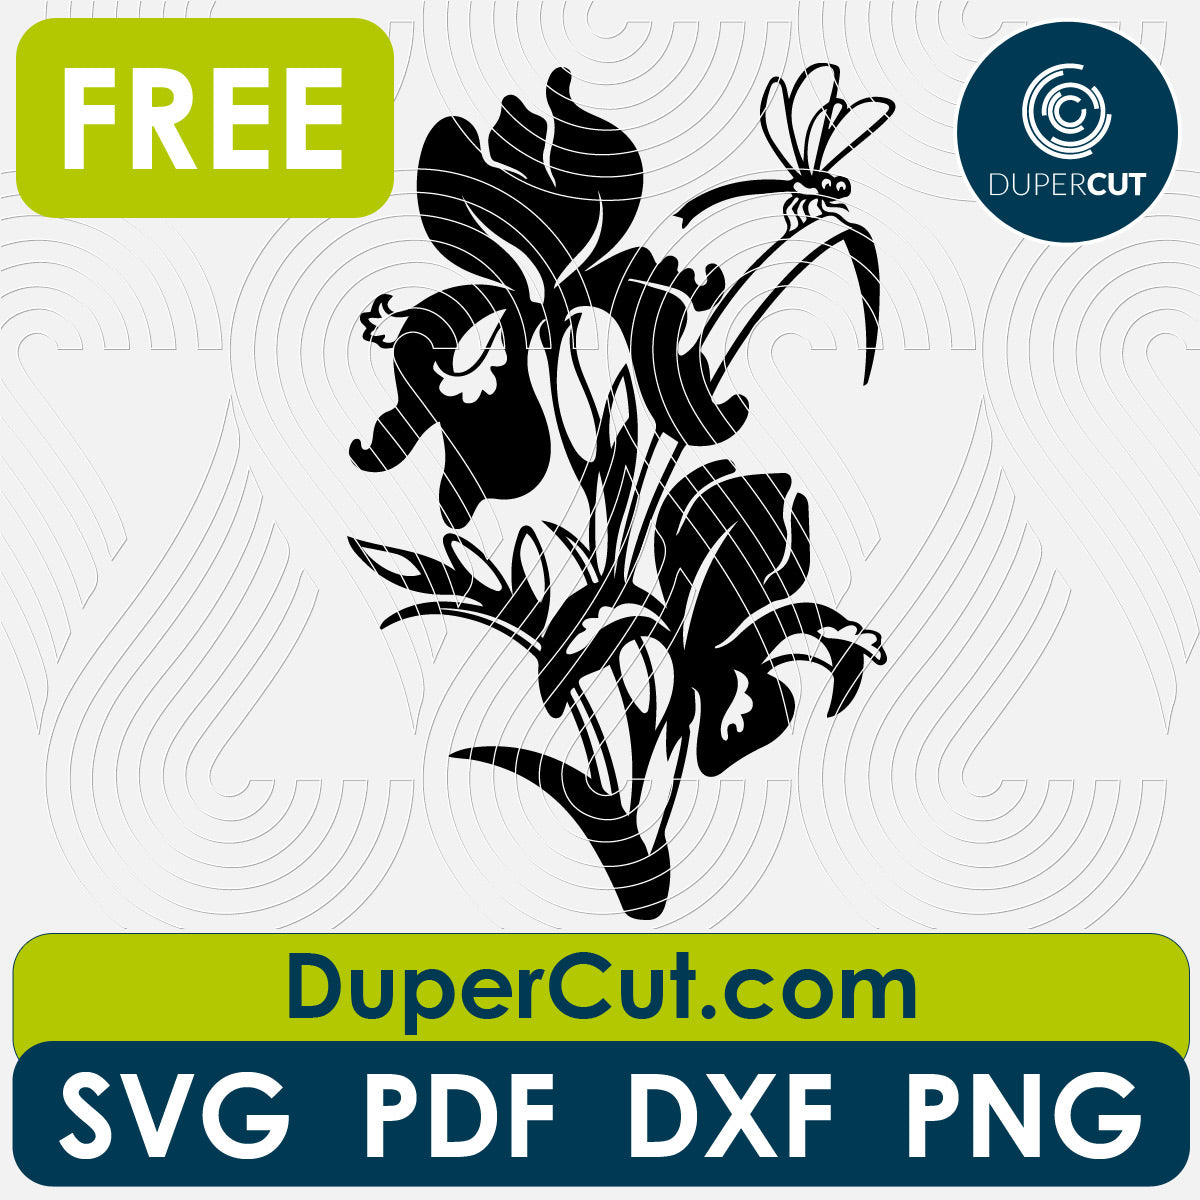 Iris Flower free cutting template SVG PNG DXF files for Glowforge, Cricut, Silhouette, CNC laser router by DuperCut.com